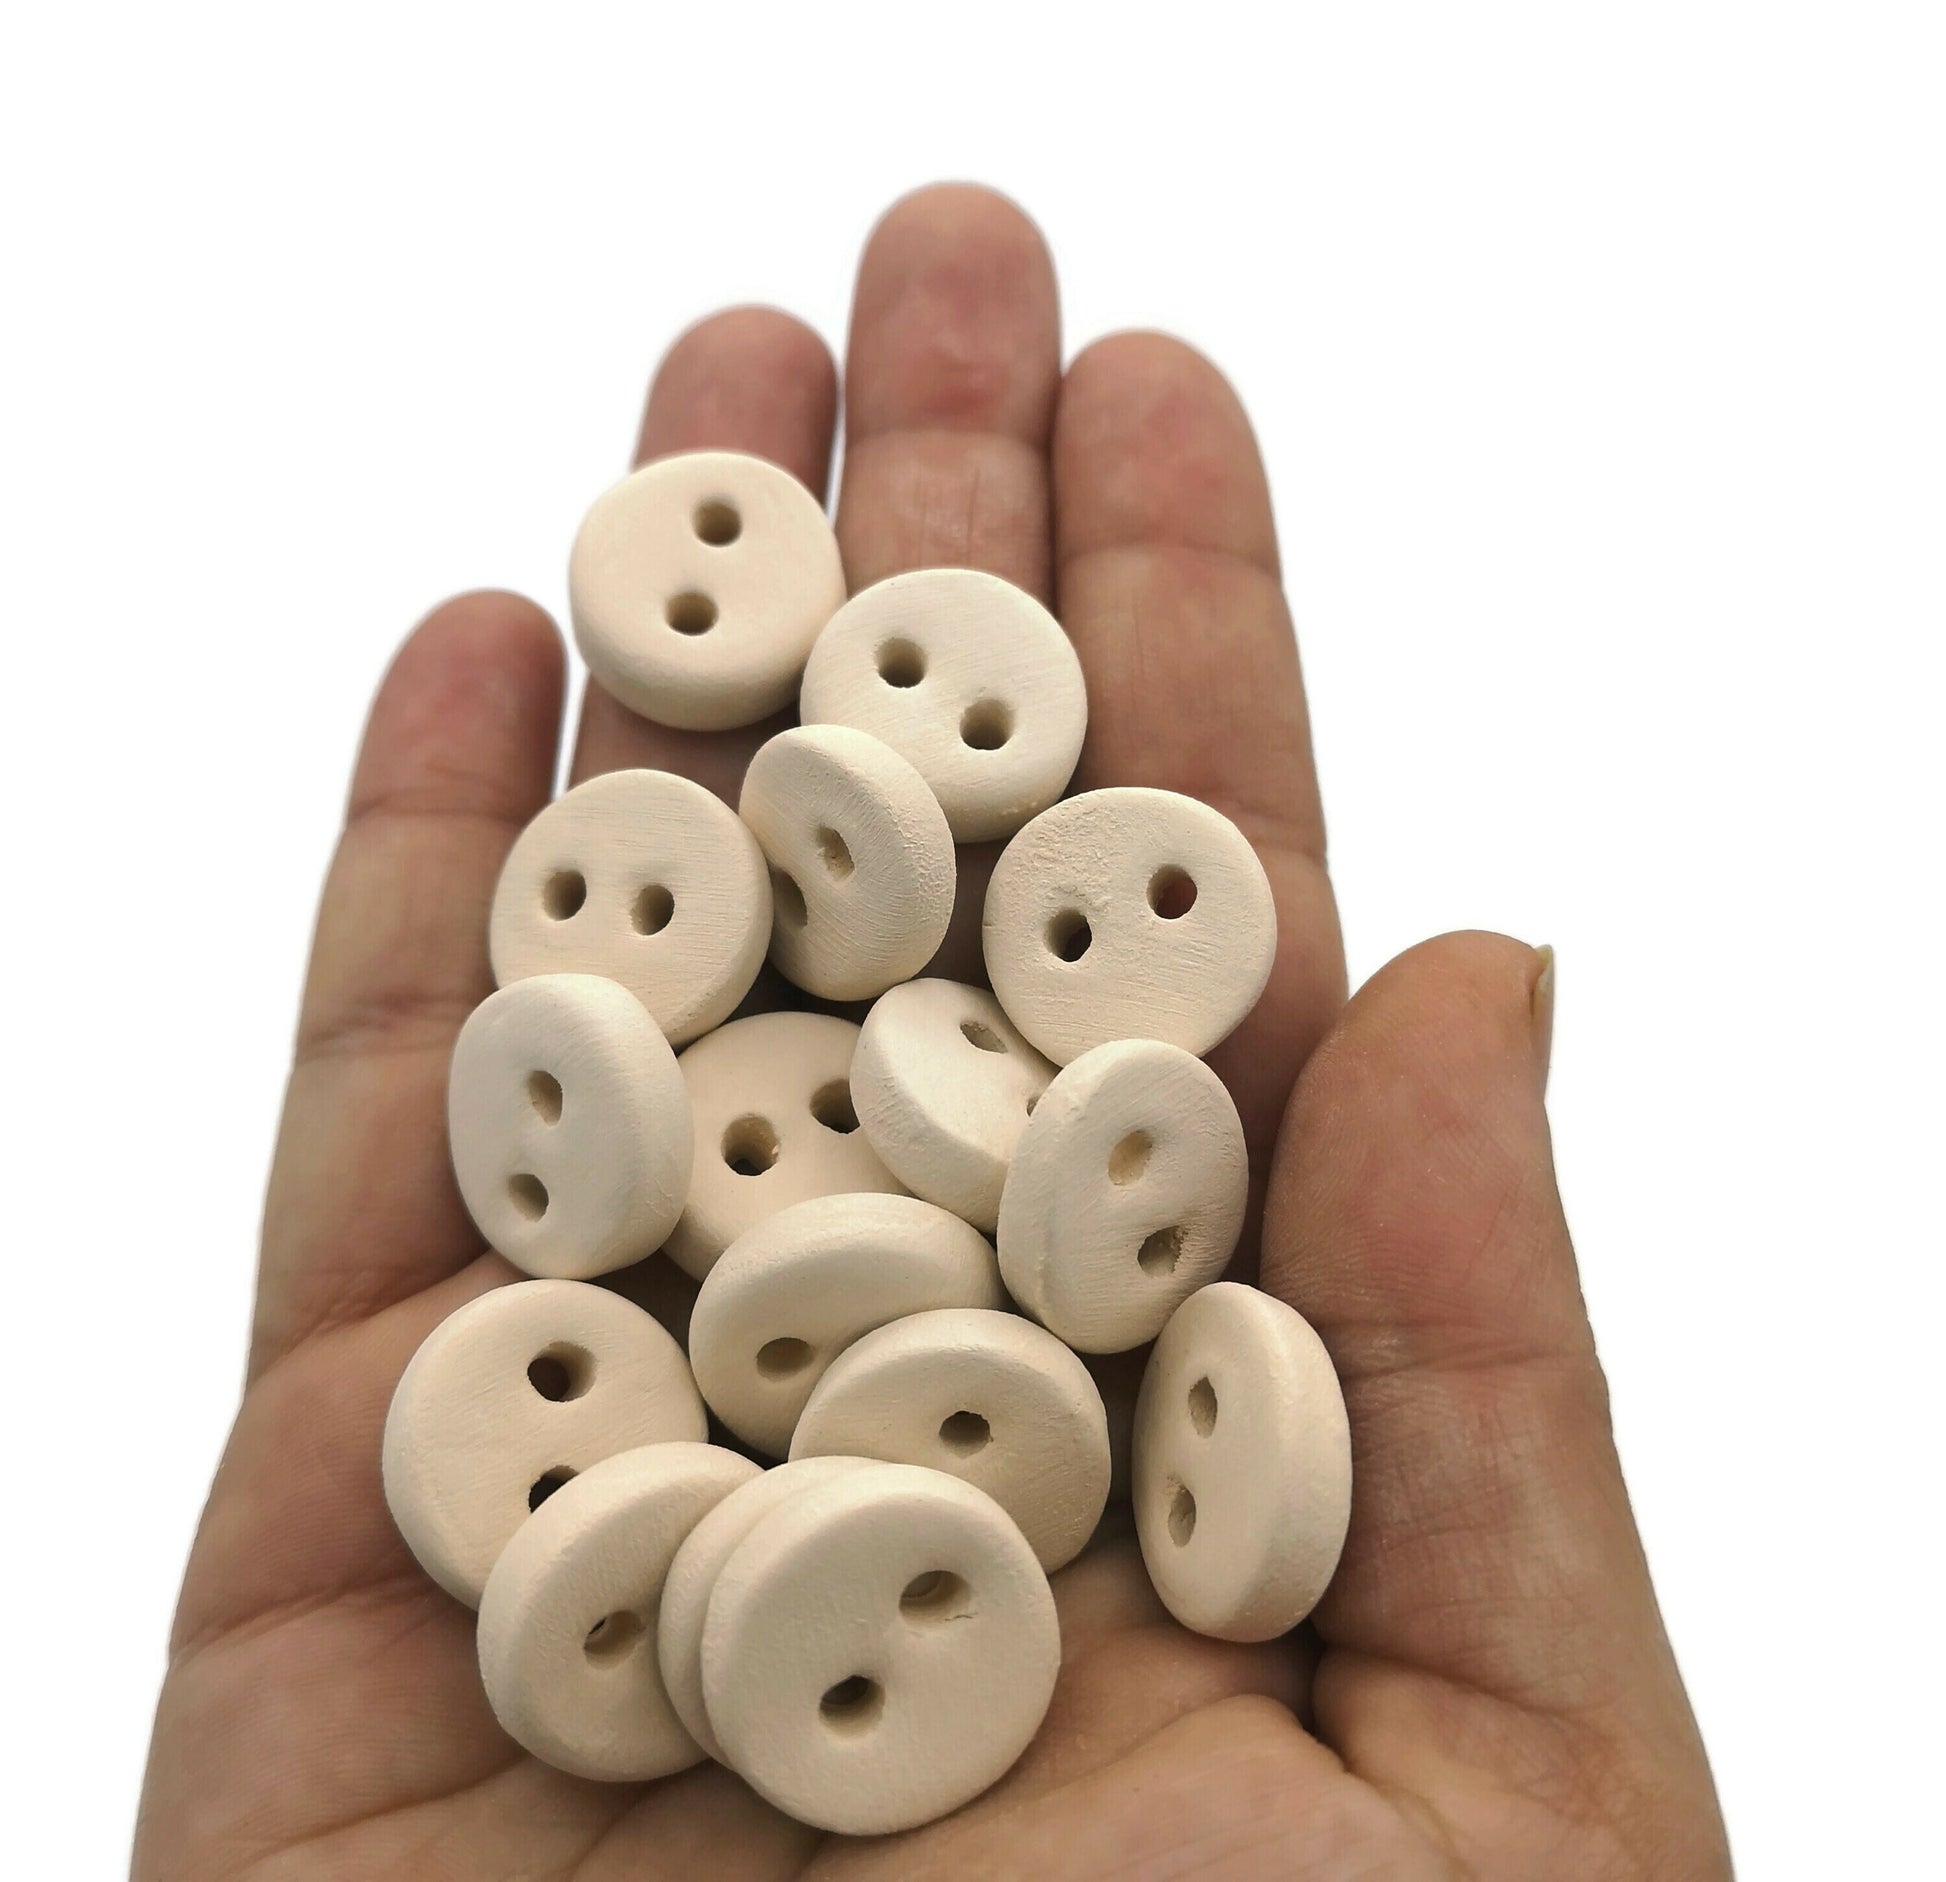 Handmade Ceramic Bisque Sewing Buttons Set Ready To Paint, Blank Unfinished Unpainted Craft Kit, Best Sellers Clothing Accessories - Ceramica Ana Rafael